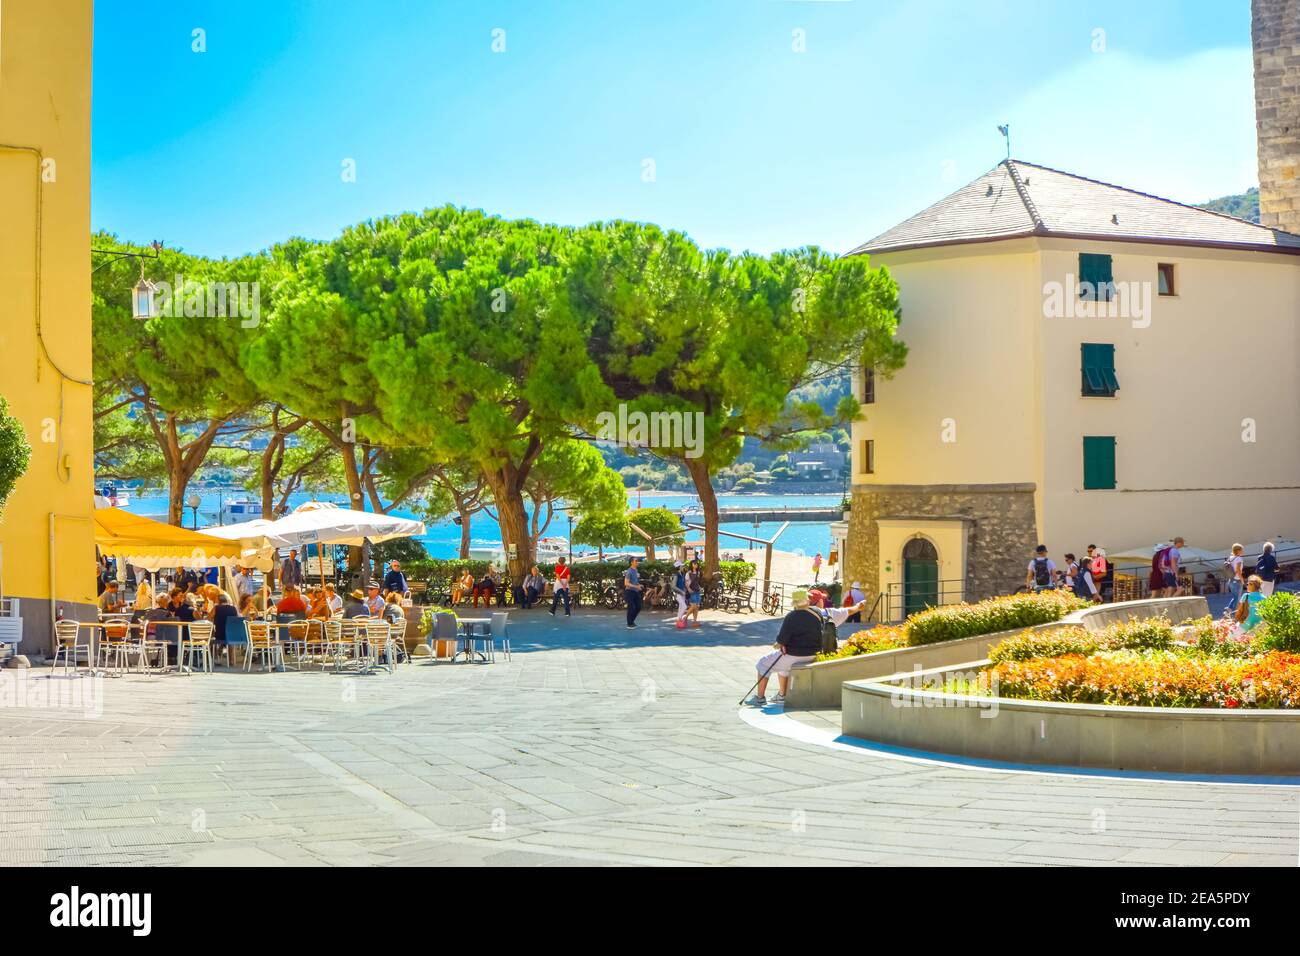 A sunny day on the Ligurian Coast as tourists enjoy cafes and relaxation on the  Piazza Bastreri in the coastal village of Portovenere, Italy Stock Photo